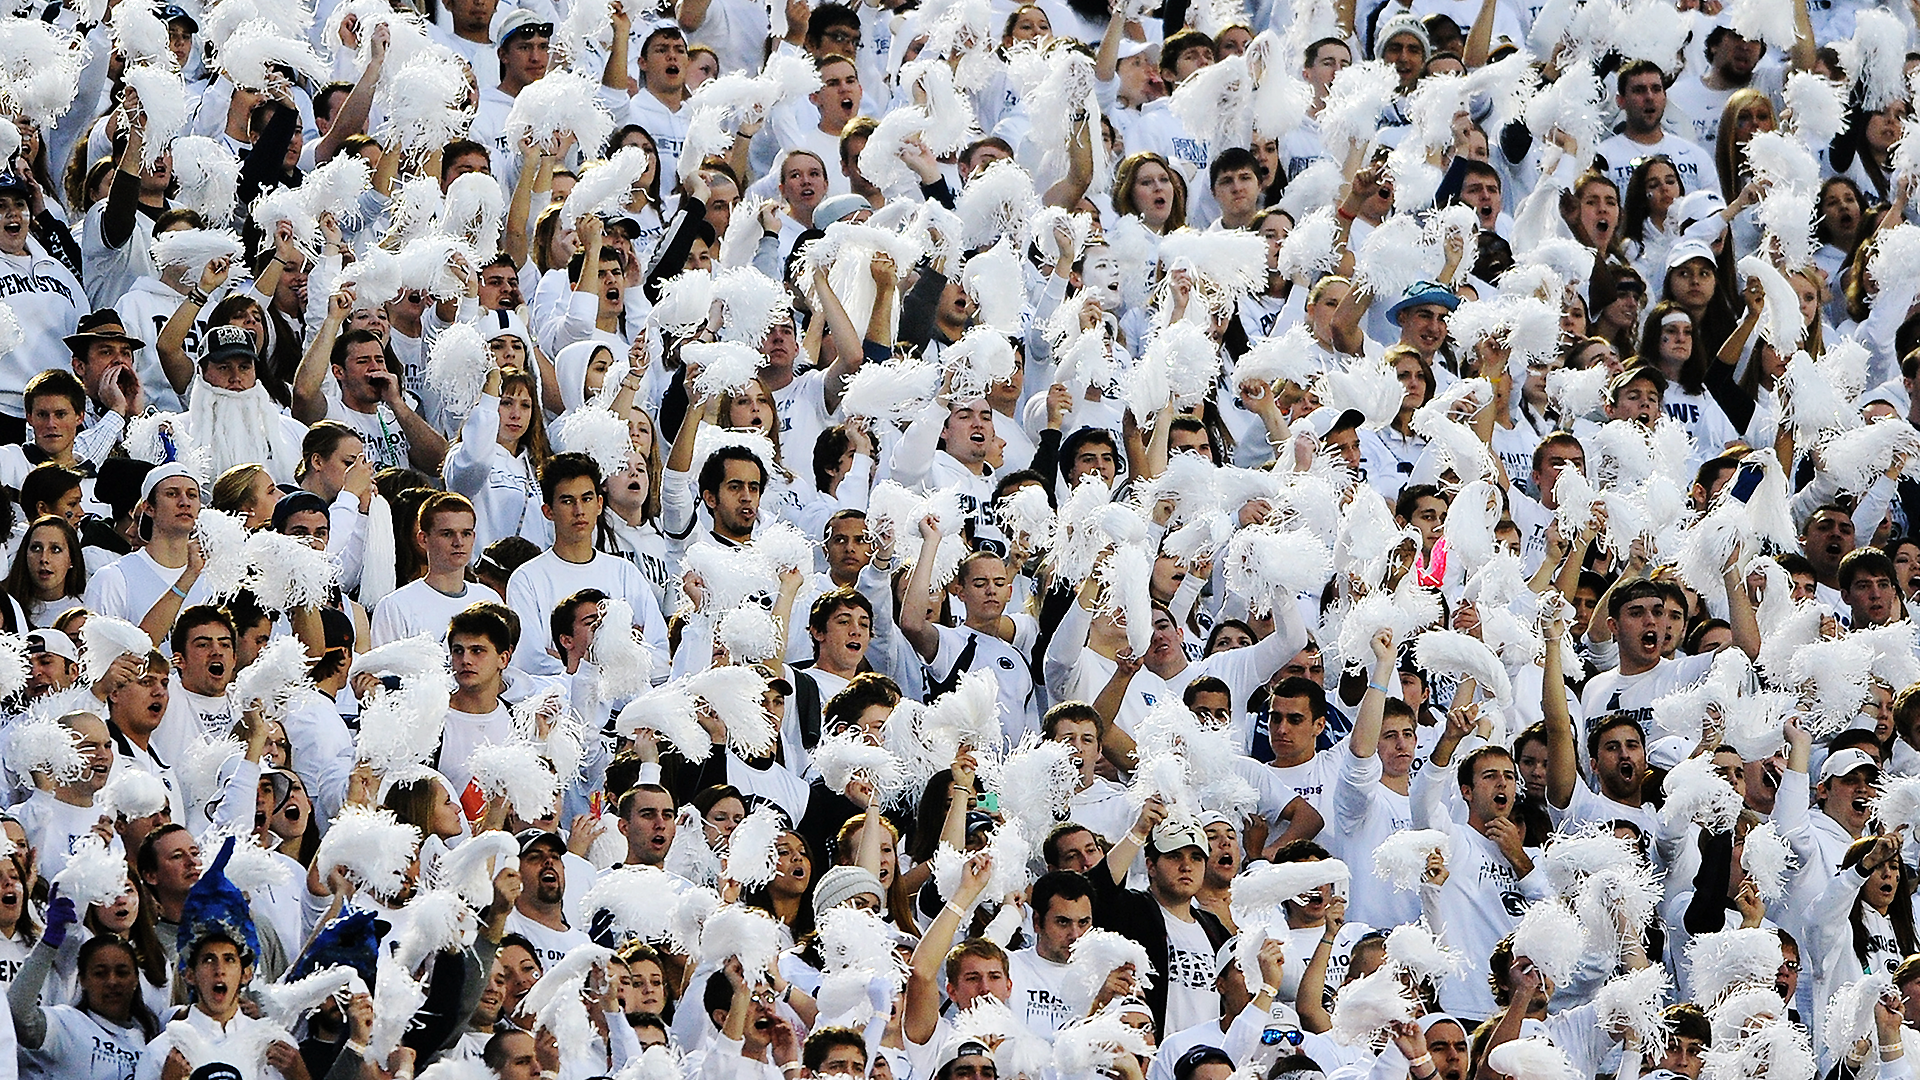 accessory ideas for white out football game